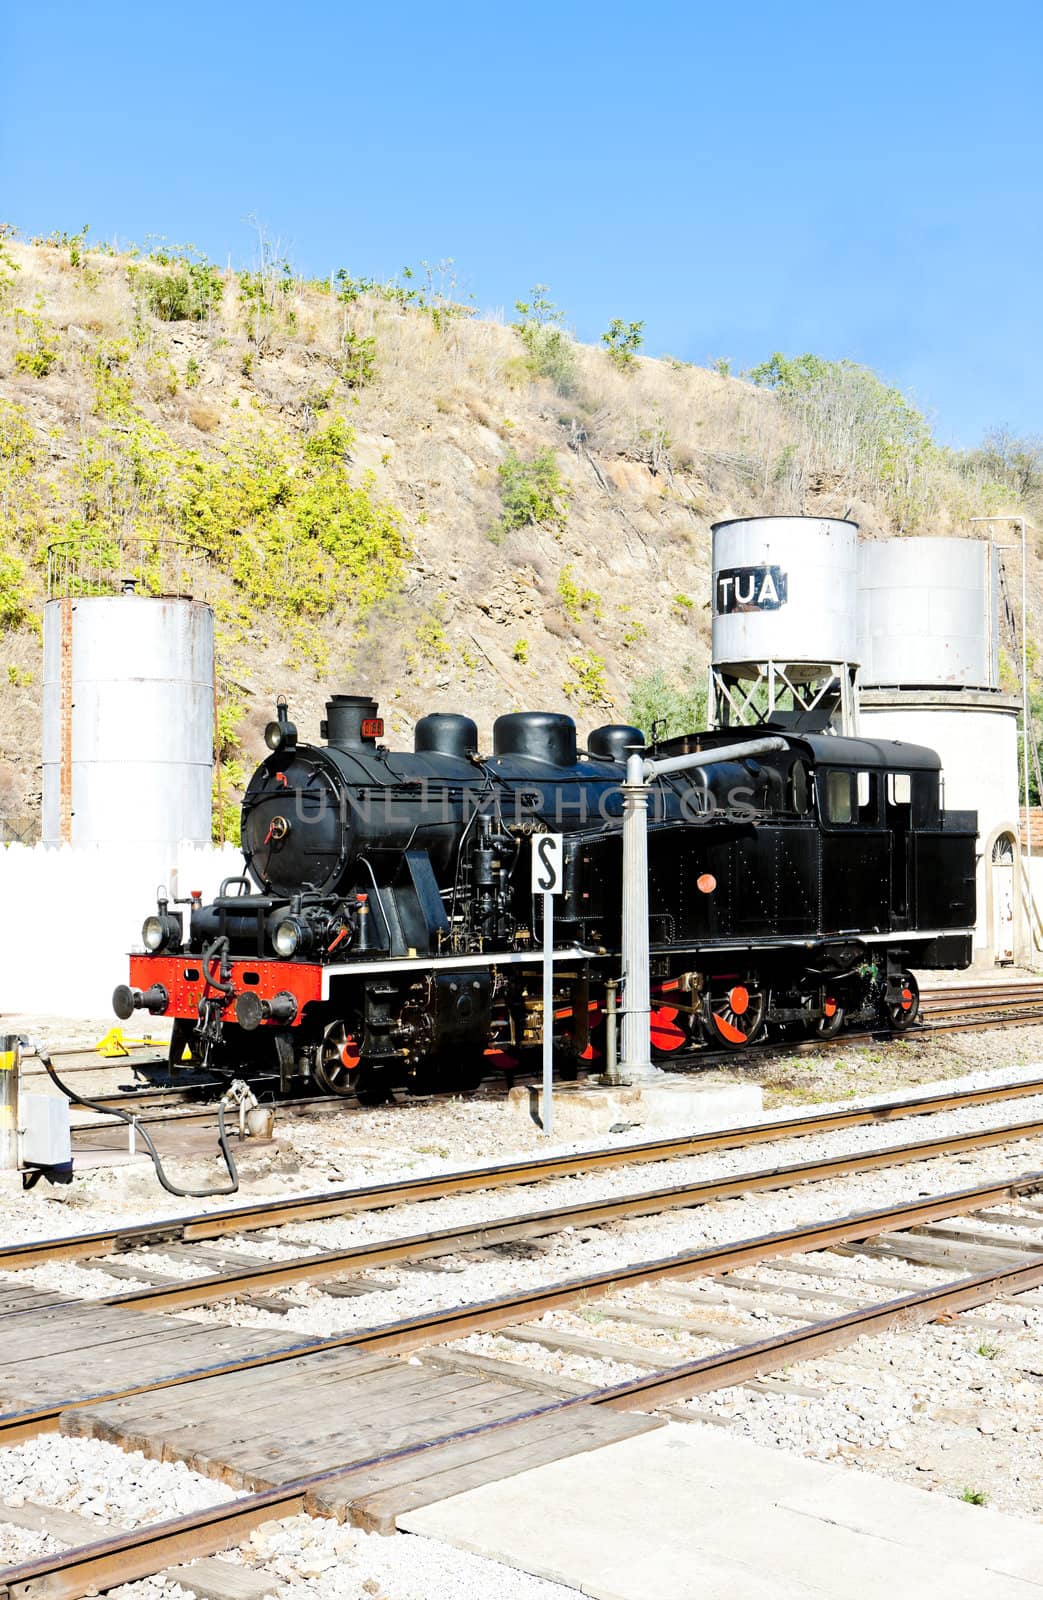 steam locomotive at railway station in Tua, Douro Valley, Portugal